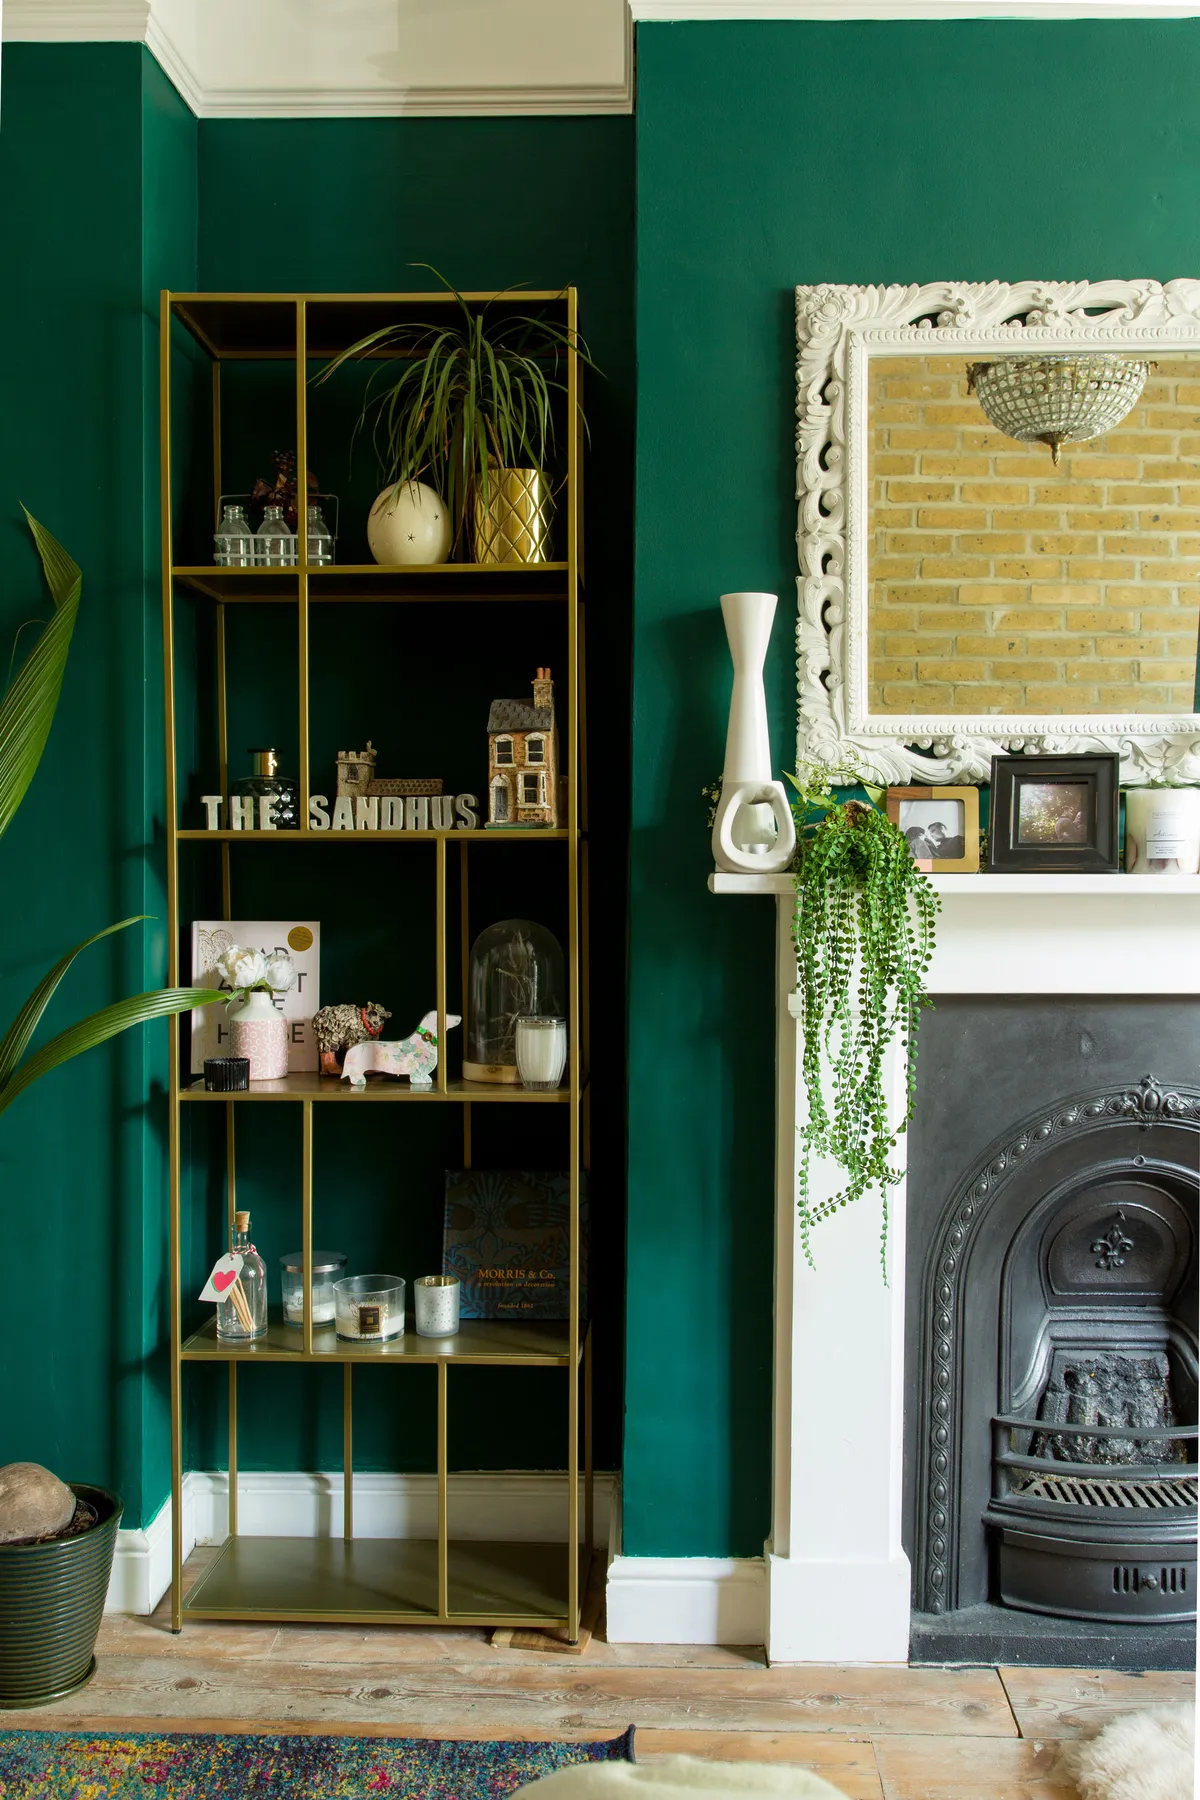 It may take a little longer to find exactly what you want, but shop for reclaimed materials to save on expensive items. ‘The floorboards were salvaged from old apartments in Notting Hill,’ says Kate